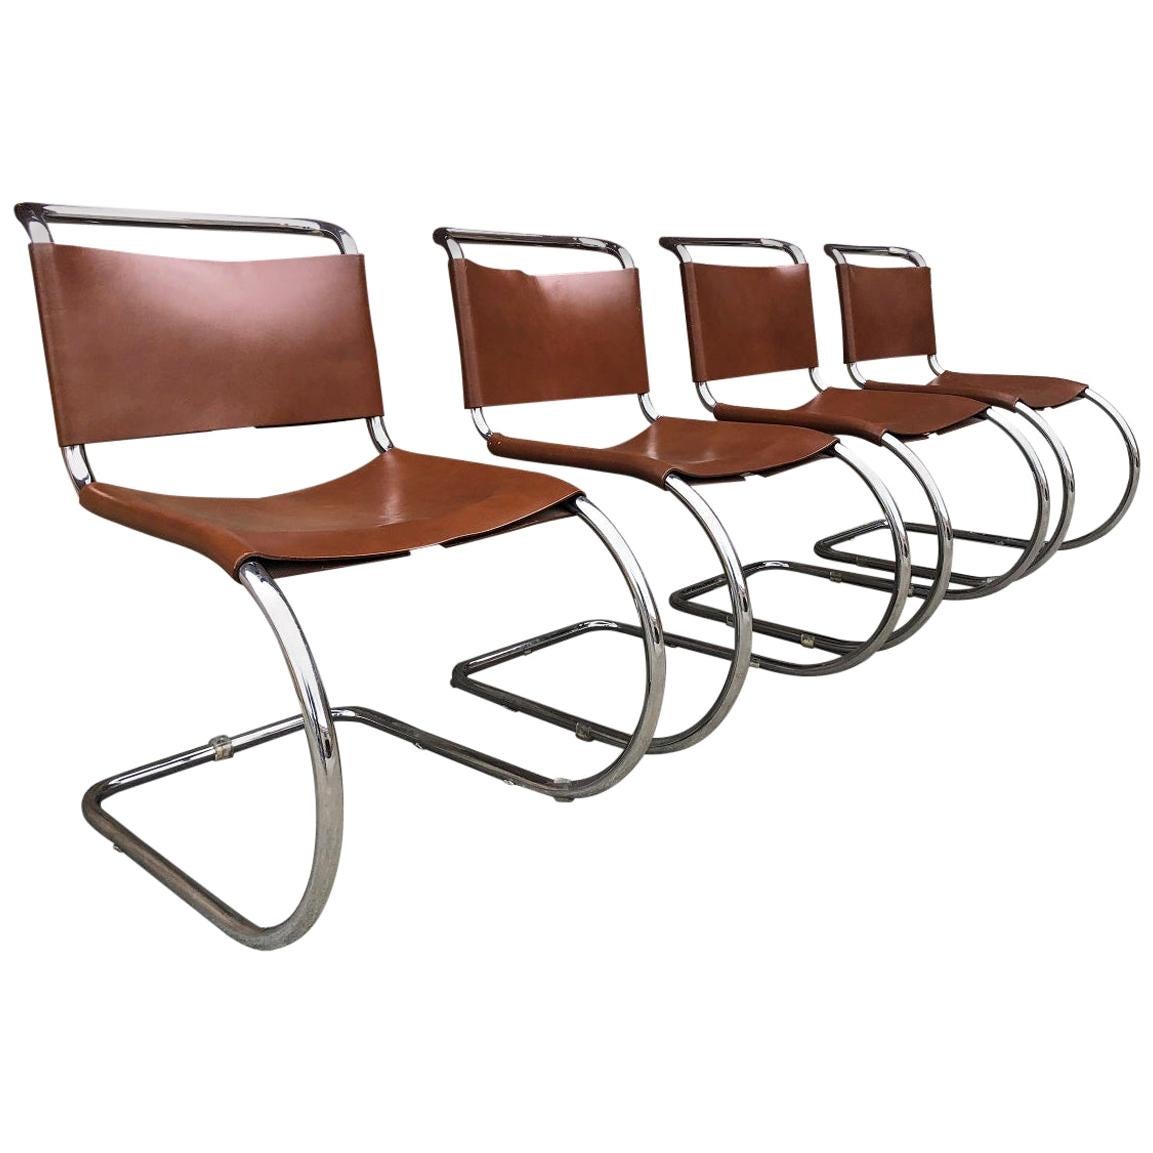 Set of 4 Mies van der Rohe Leather MR10 Cantilever Chairs for Knoll Int'l